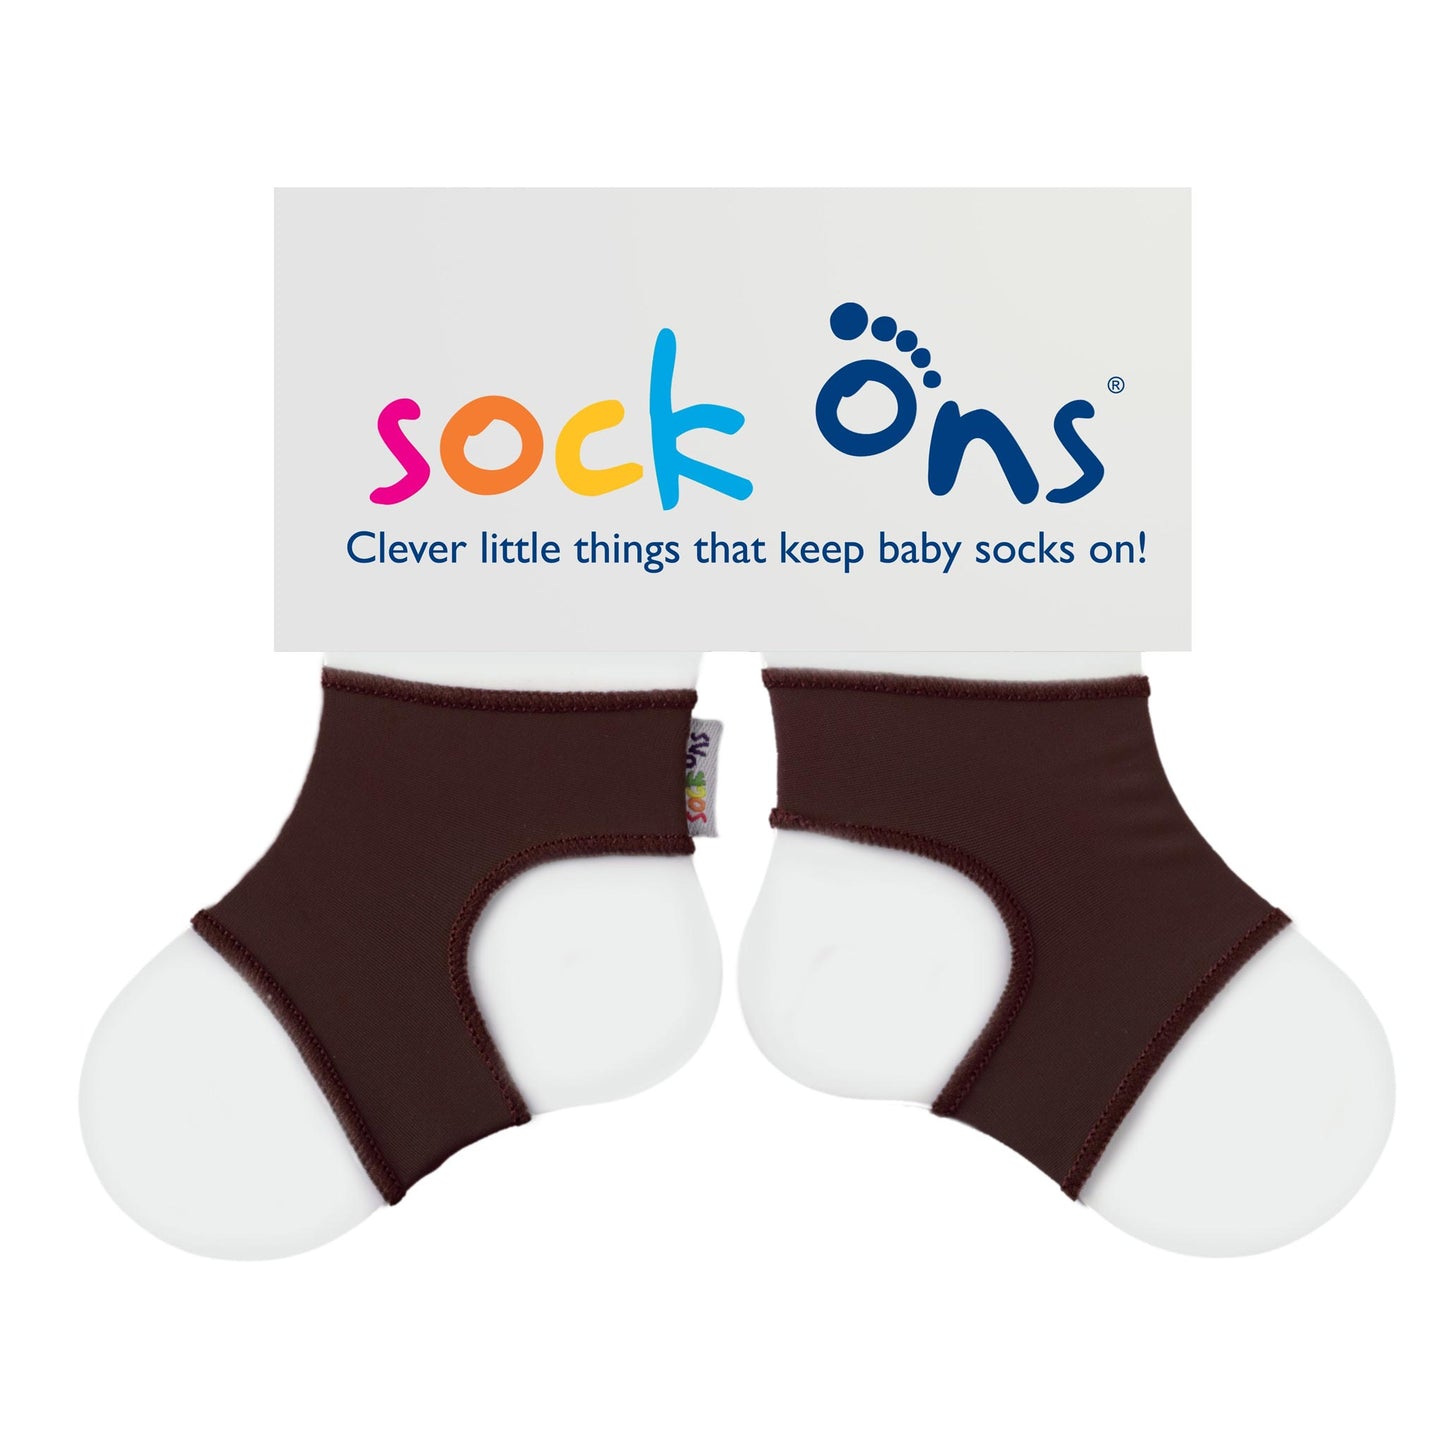 Made of soft, stretchy material, Sock Ons are designed to fit over regular socks, keeping them firmly in place no matter how hard your baby kicks and tugs.